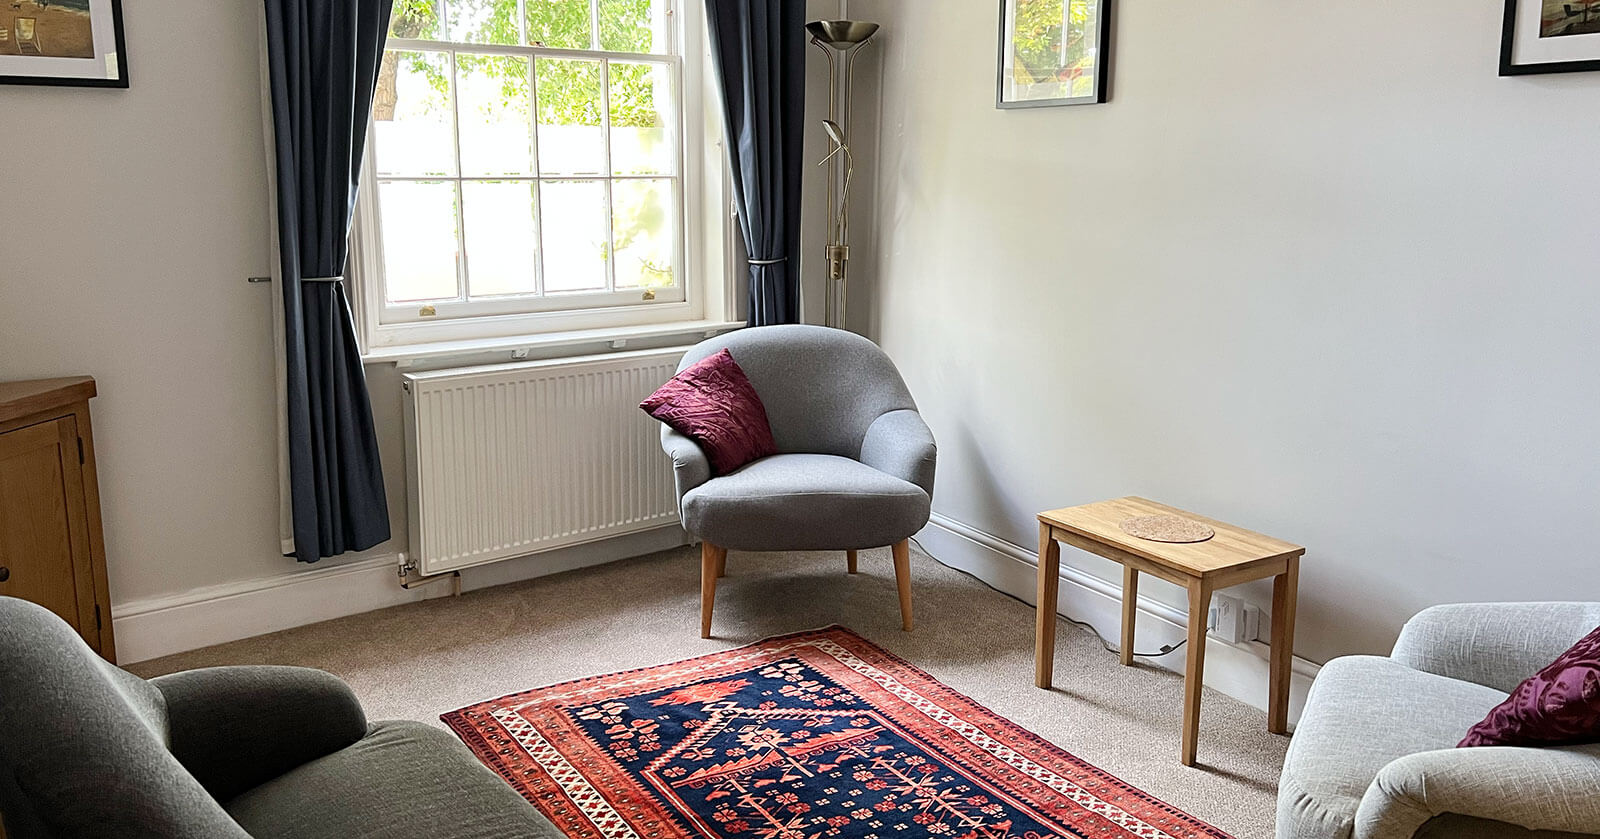 Therapy Rooms in Bristol - Face-to-Face Hypnotherapy